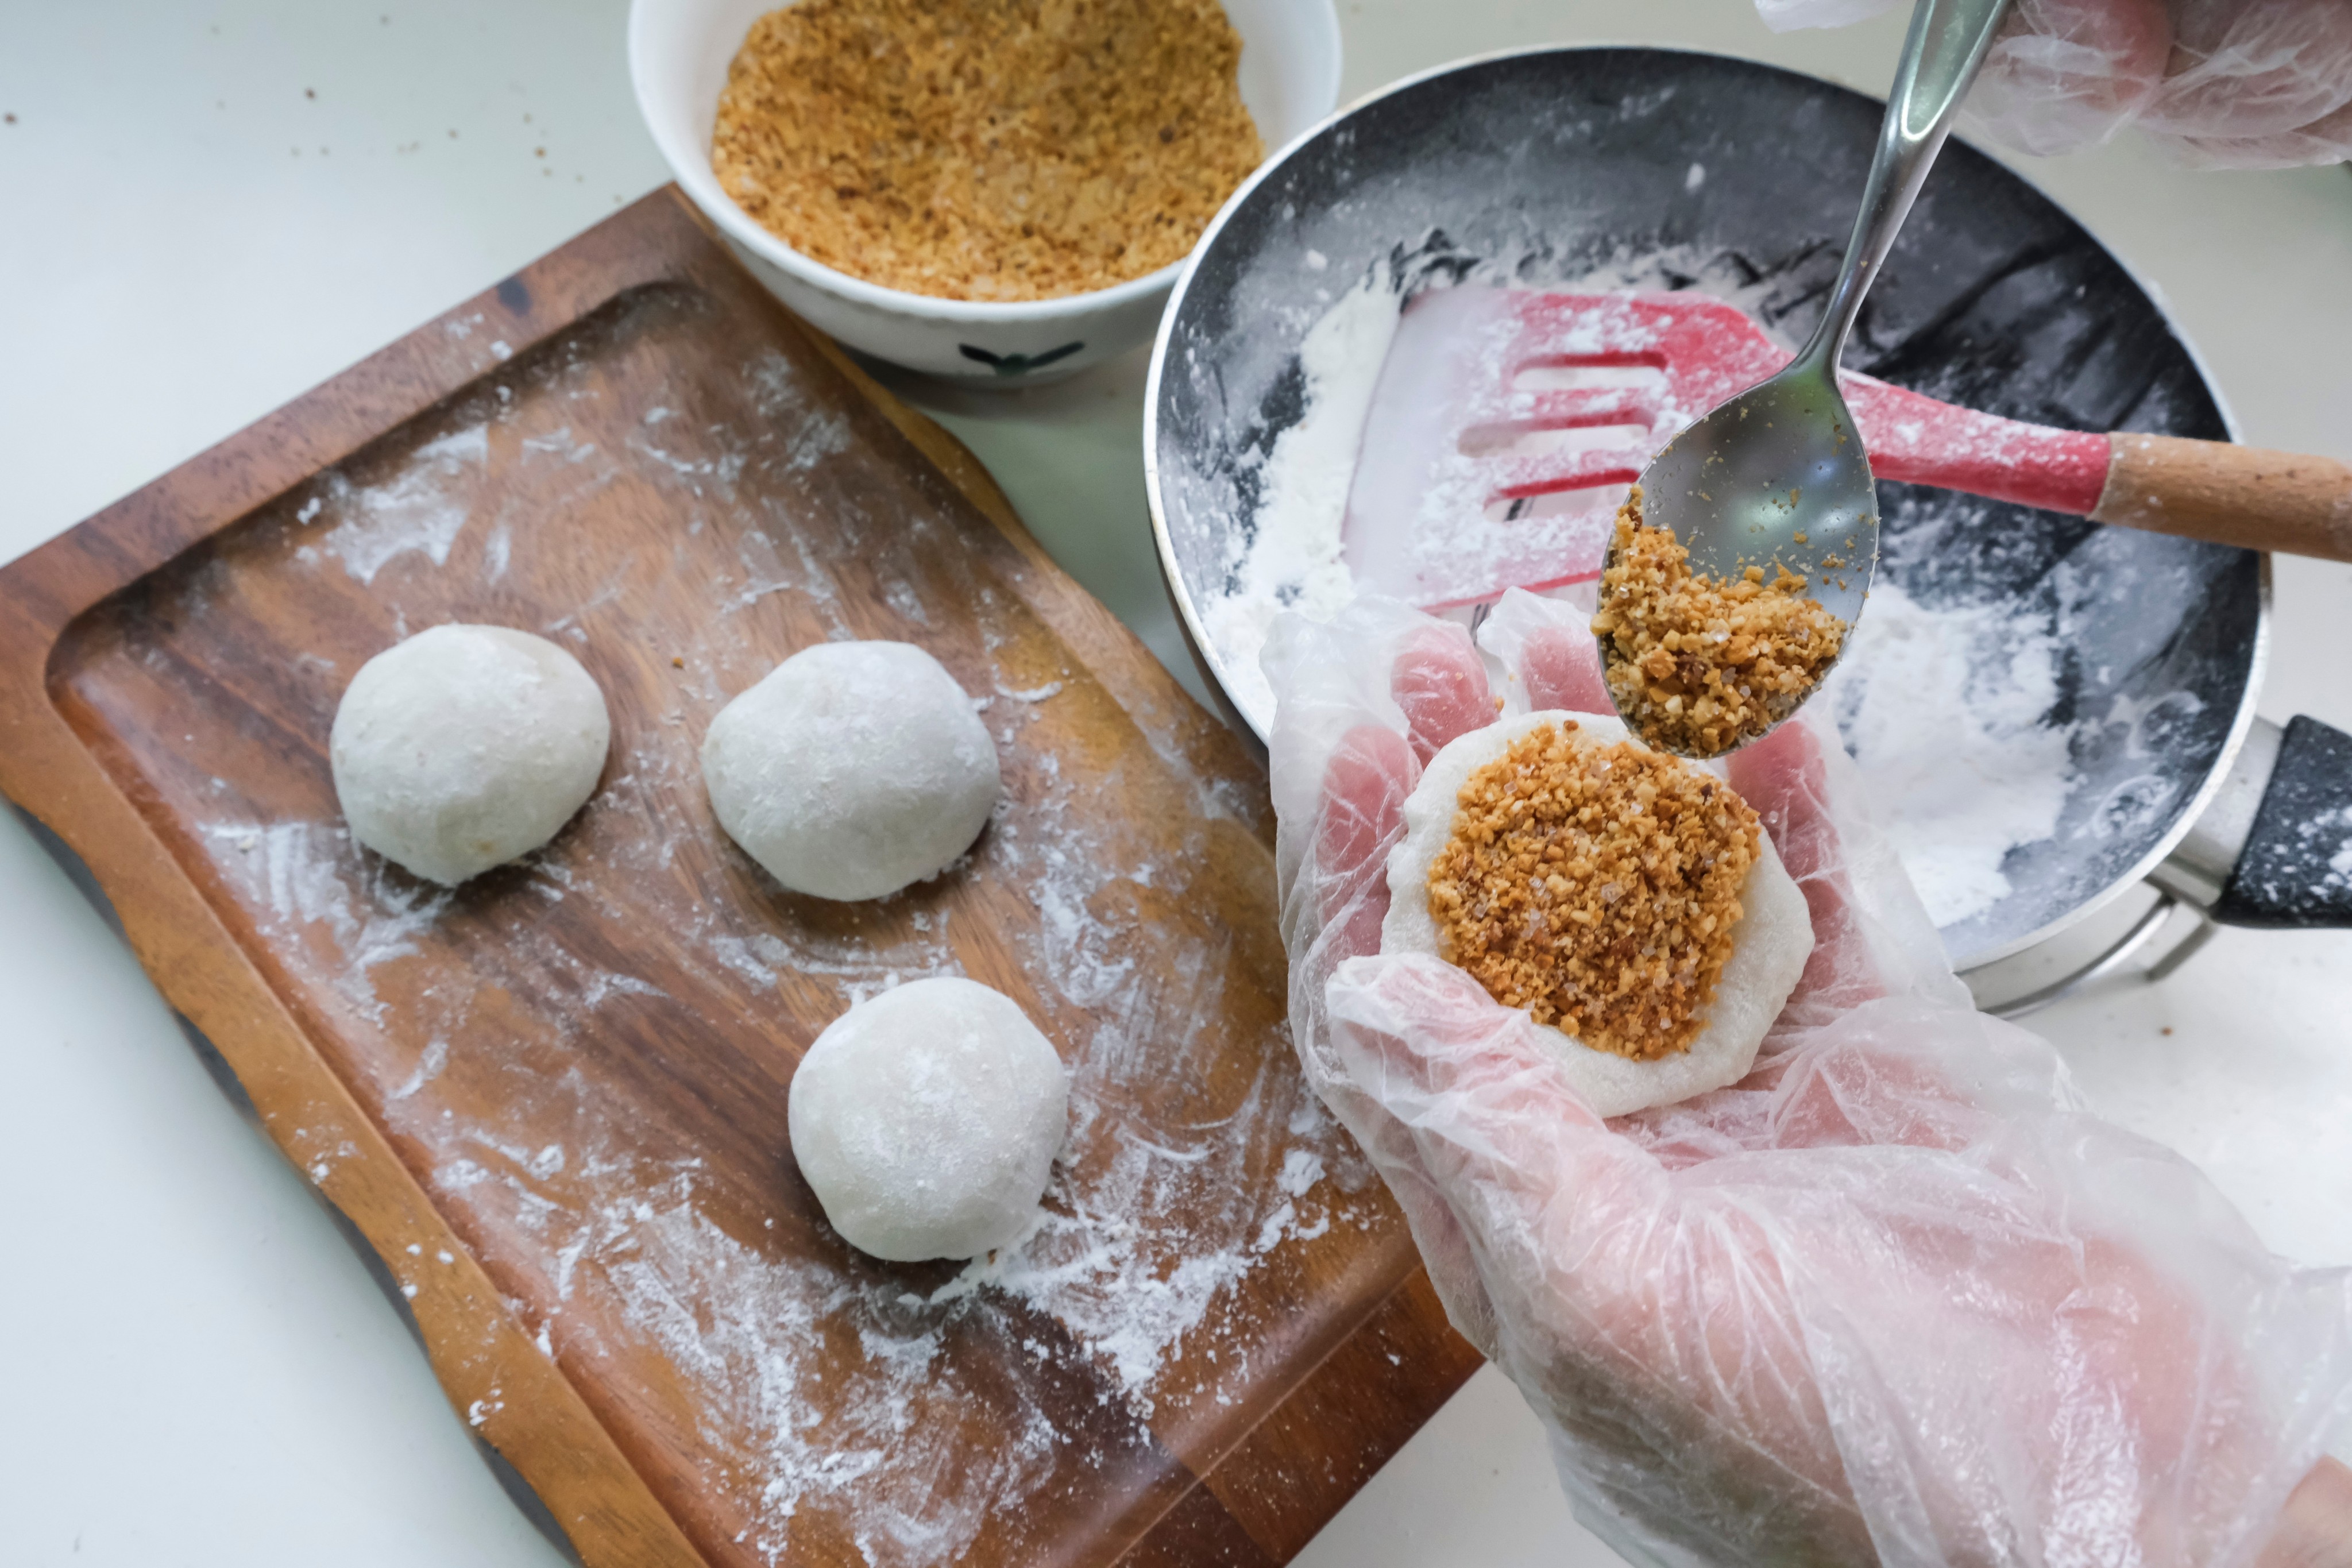 Hong Kong lo mai chi aka Chinese mochi is a popular Hong Kong snack. Although the character used for mochi in Japanese has a different meaning in Chinese, similar sounding snacks like this throughout Asia suggest a common origin. Photo: Shutterstock